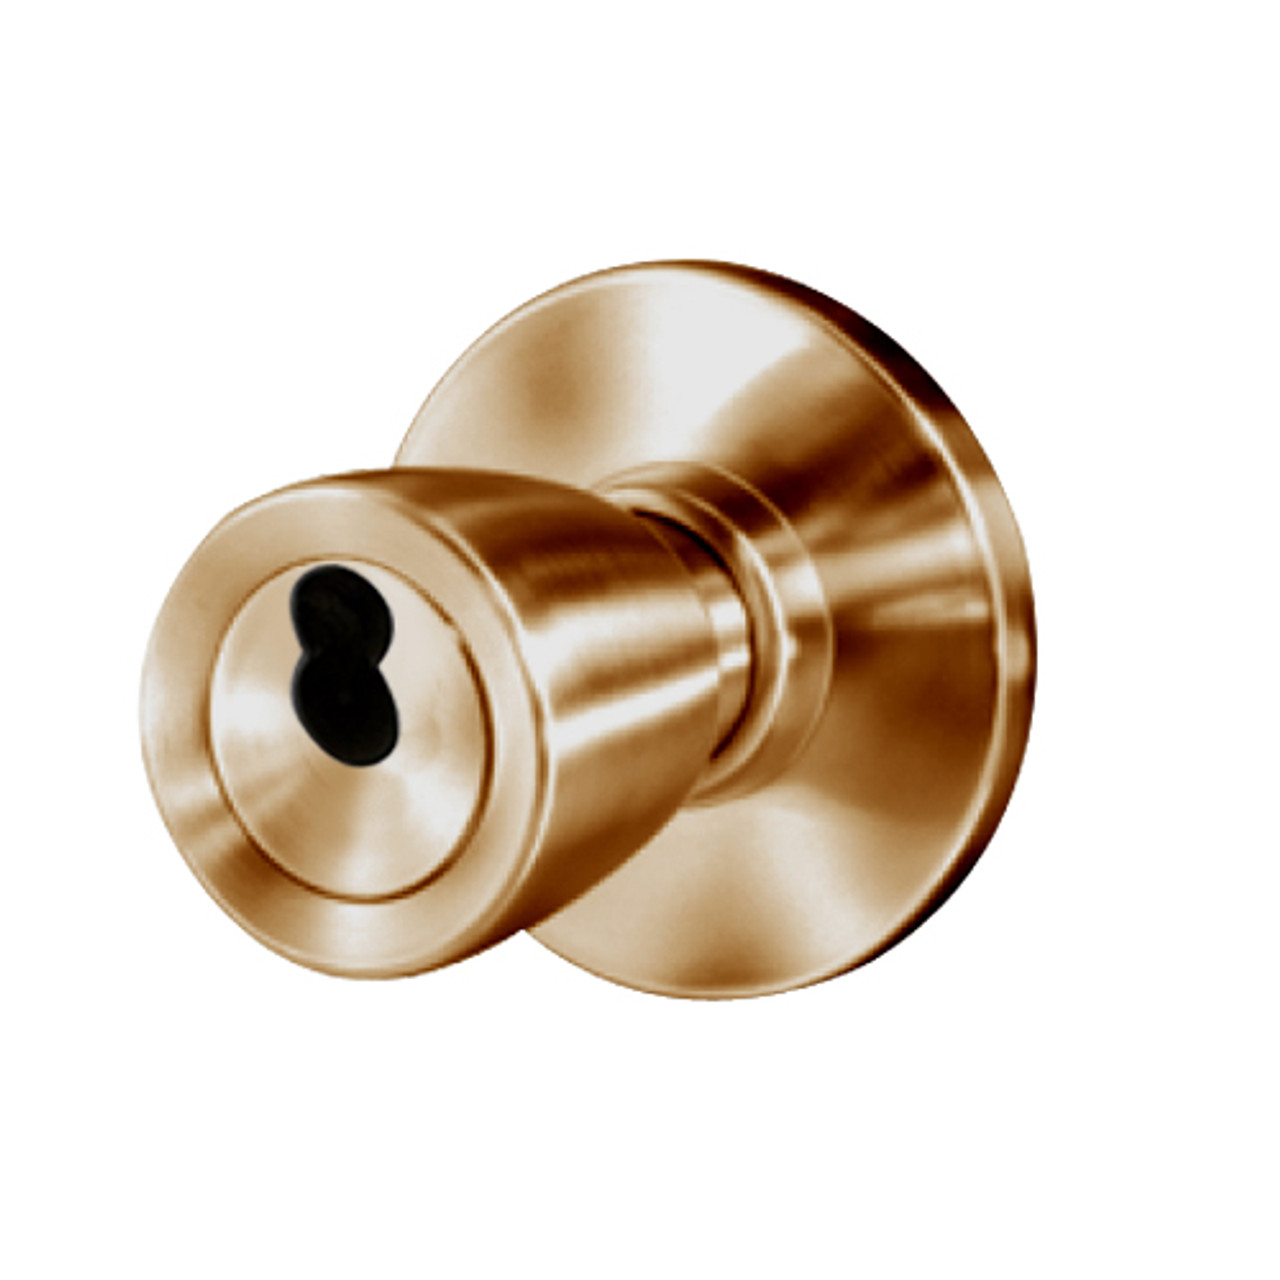 8K57A6AS3612 Best 8K Series Dormitory/Storeroom Heavy Duty Cylindrical Knob Locks with Tulip Style in Satin Bronze